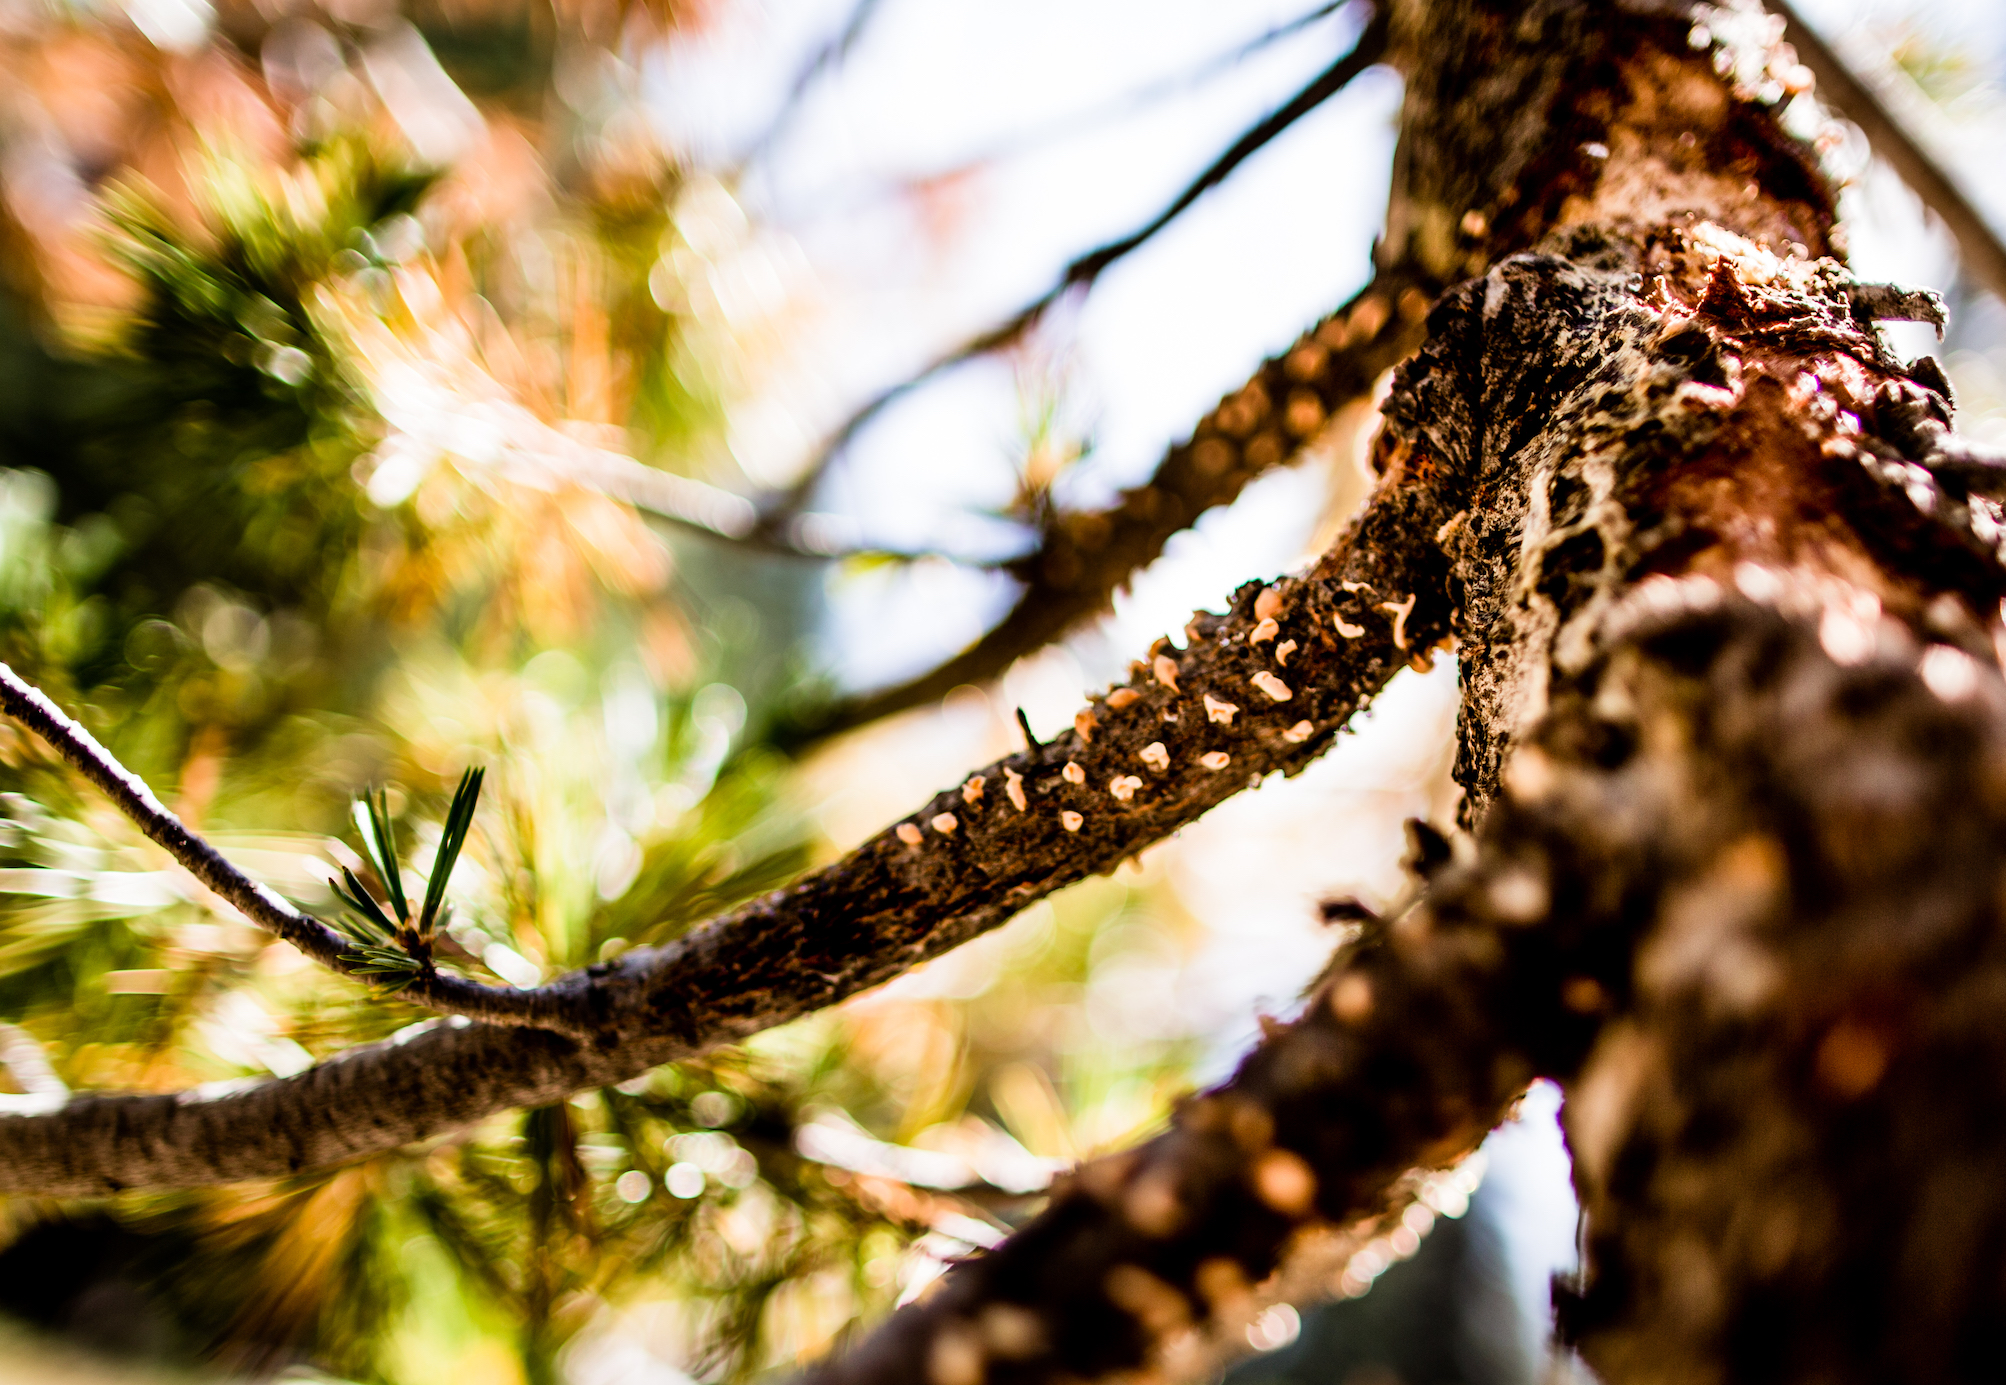 Spores from white pine blister rust disease infect a pine tree in Sequoia and Kings Canyon national parks. (Clayton Boyd)